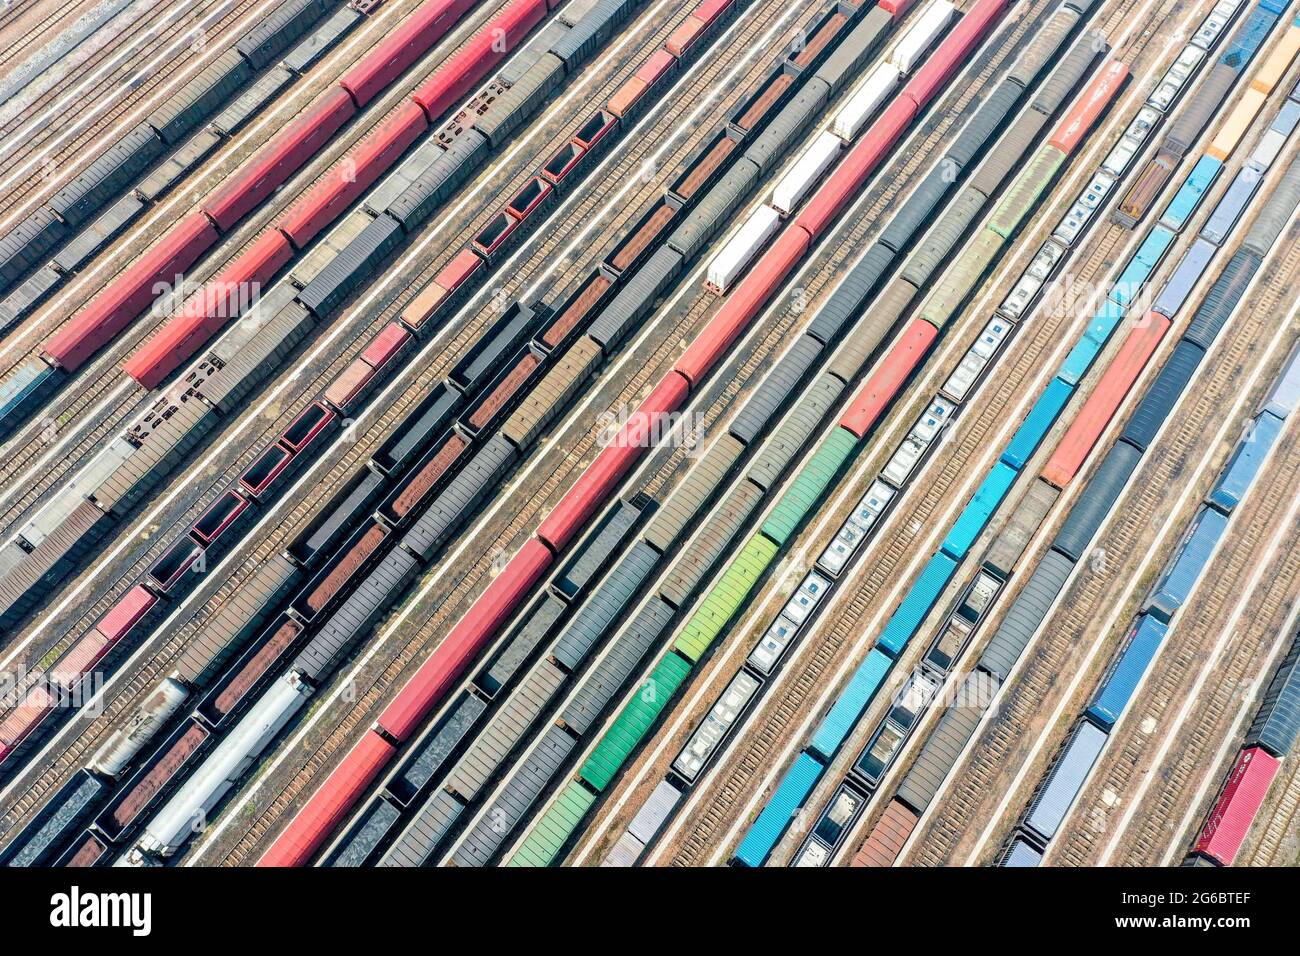 Zhengzhou, Zhengzhou, China. 5th July, 2021. On July 3, 2021, Zhengzhou City, Henan Province, aerial photographs of freight cars at the railway marshalling station of Zhengzhou North Railway Station.Zhengzhou North Railway Station is a special-class station under the jurisdiction of China Railway Zhengzhou Bureau Group Co., Ltd., and an important station connecting Beijing-Guangzhou Railway and Longhai Railway. Construction started in 1959 and completed and put into use in 1963. It mainly handles the arrival, disassembly, marshalling, and departure tasks of freight trains on the Beijing-Guan Stock Photo